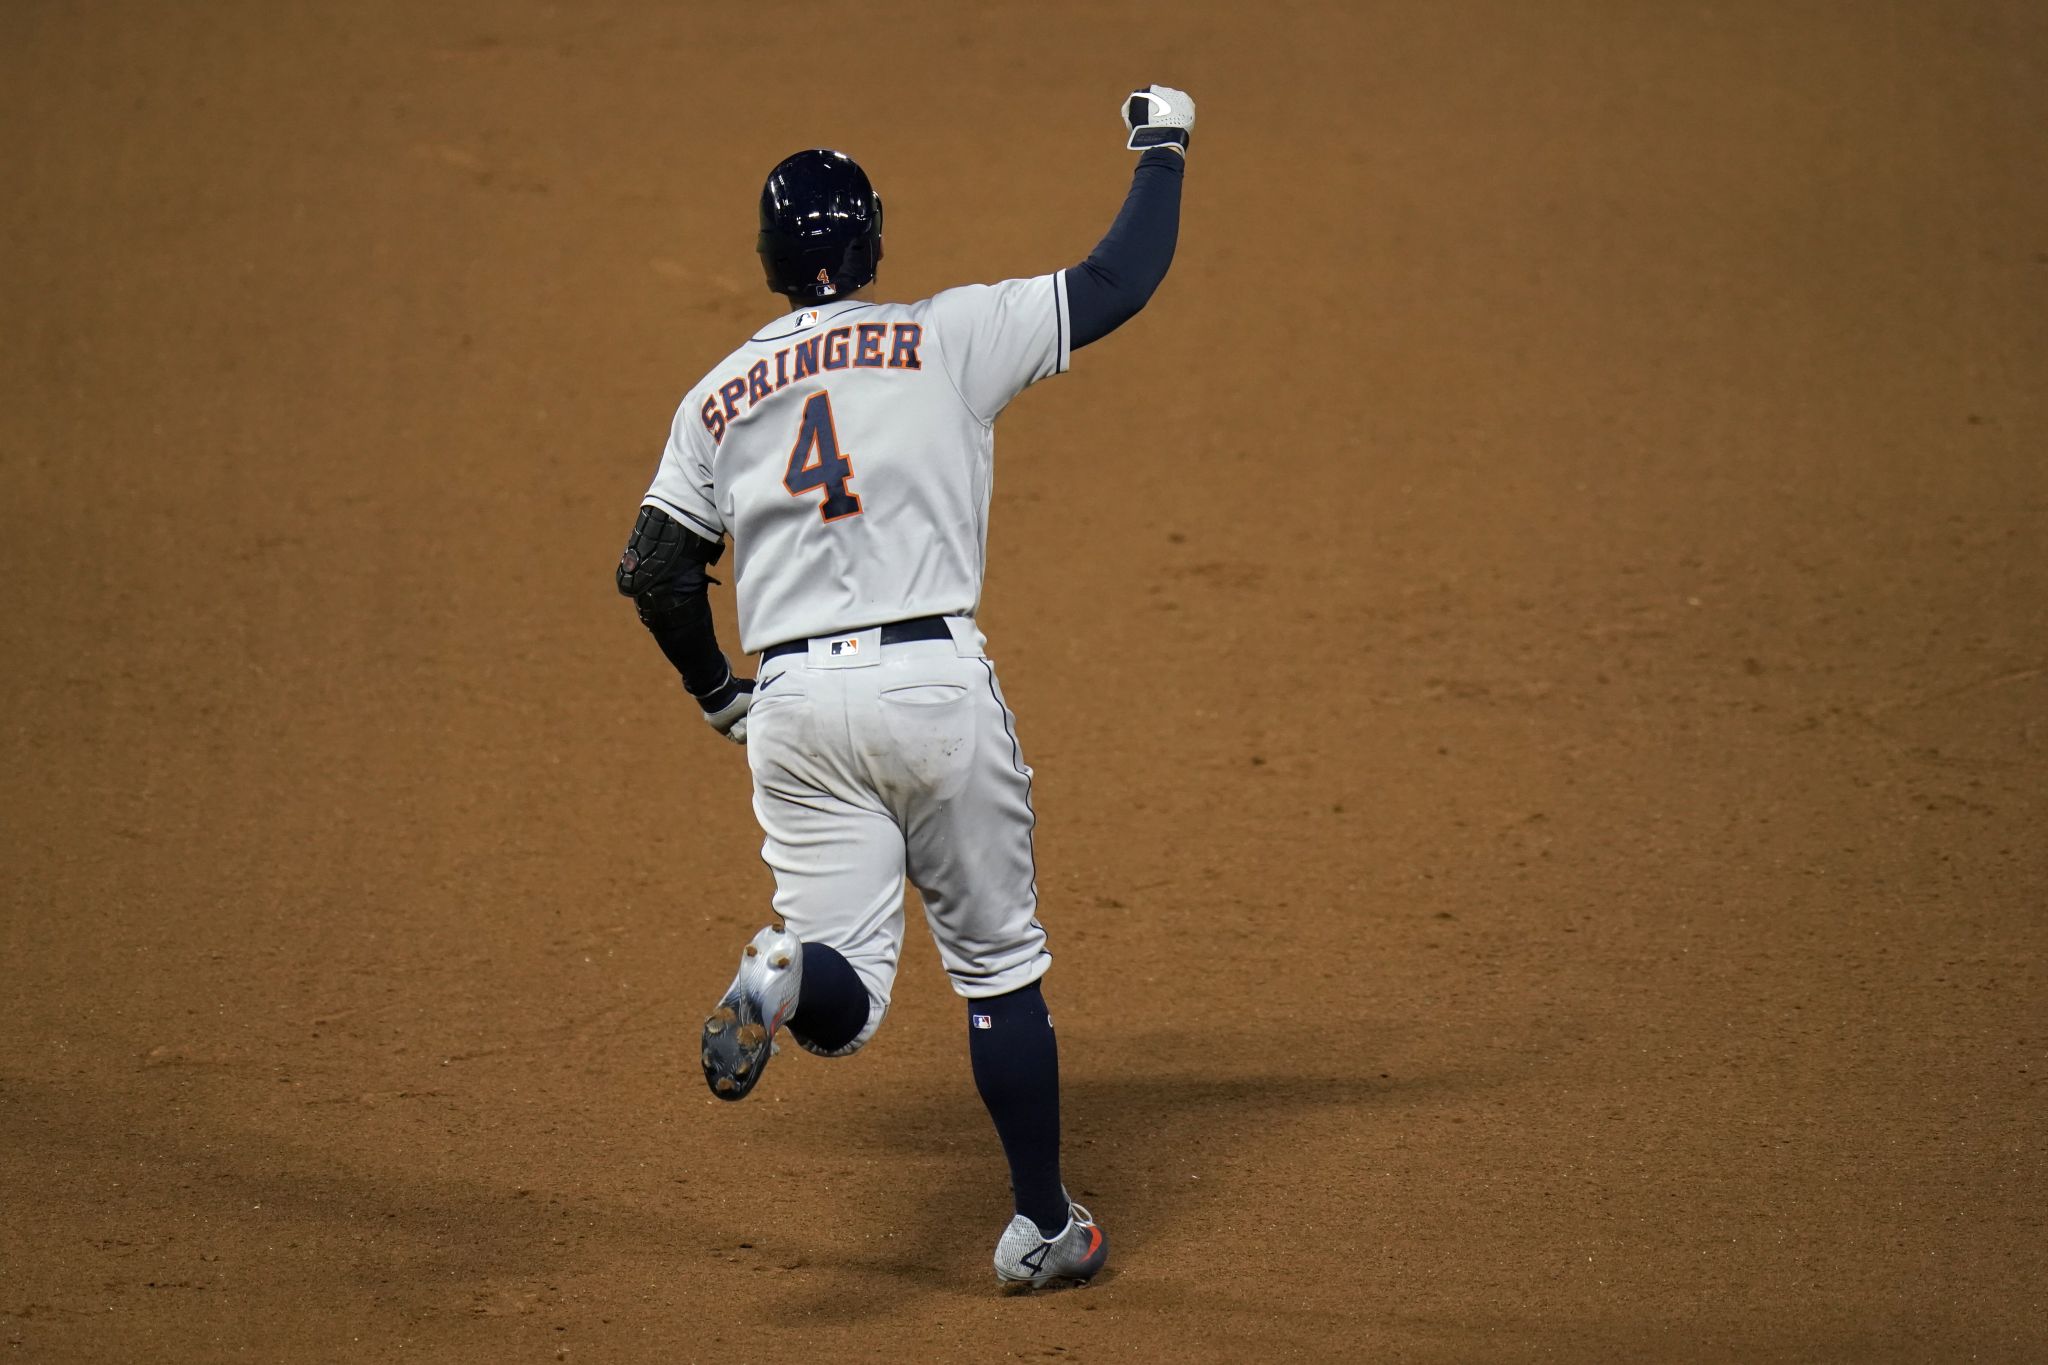 Blue Jays sign George Springer to six-year, $150 million deal, per